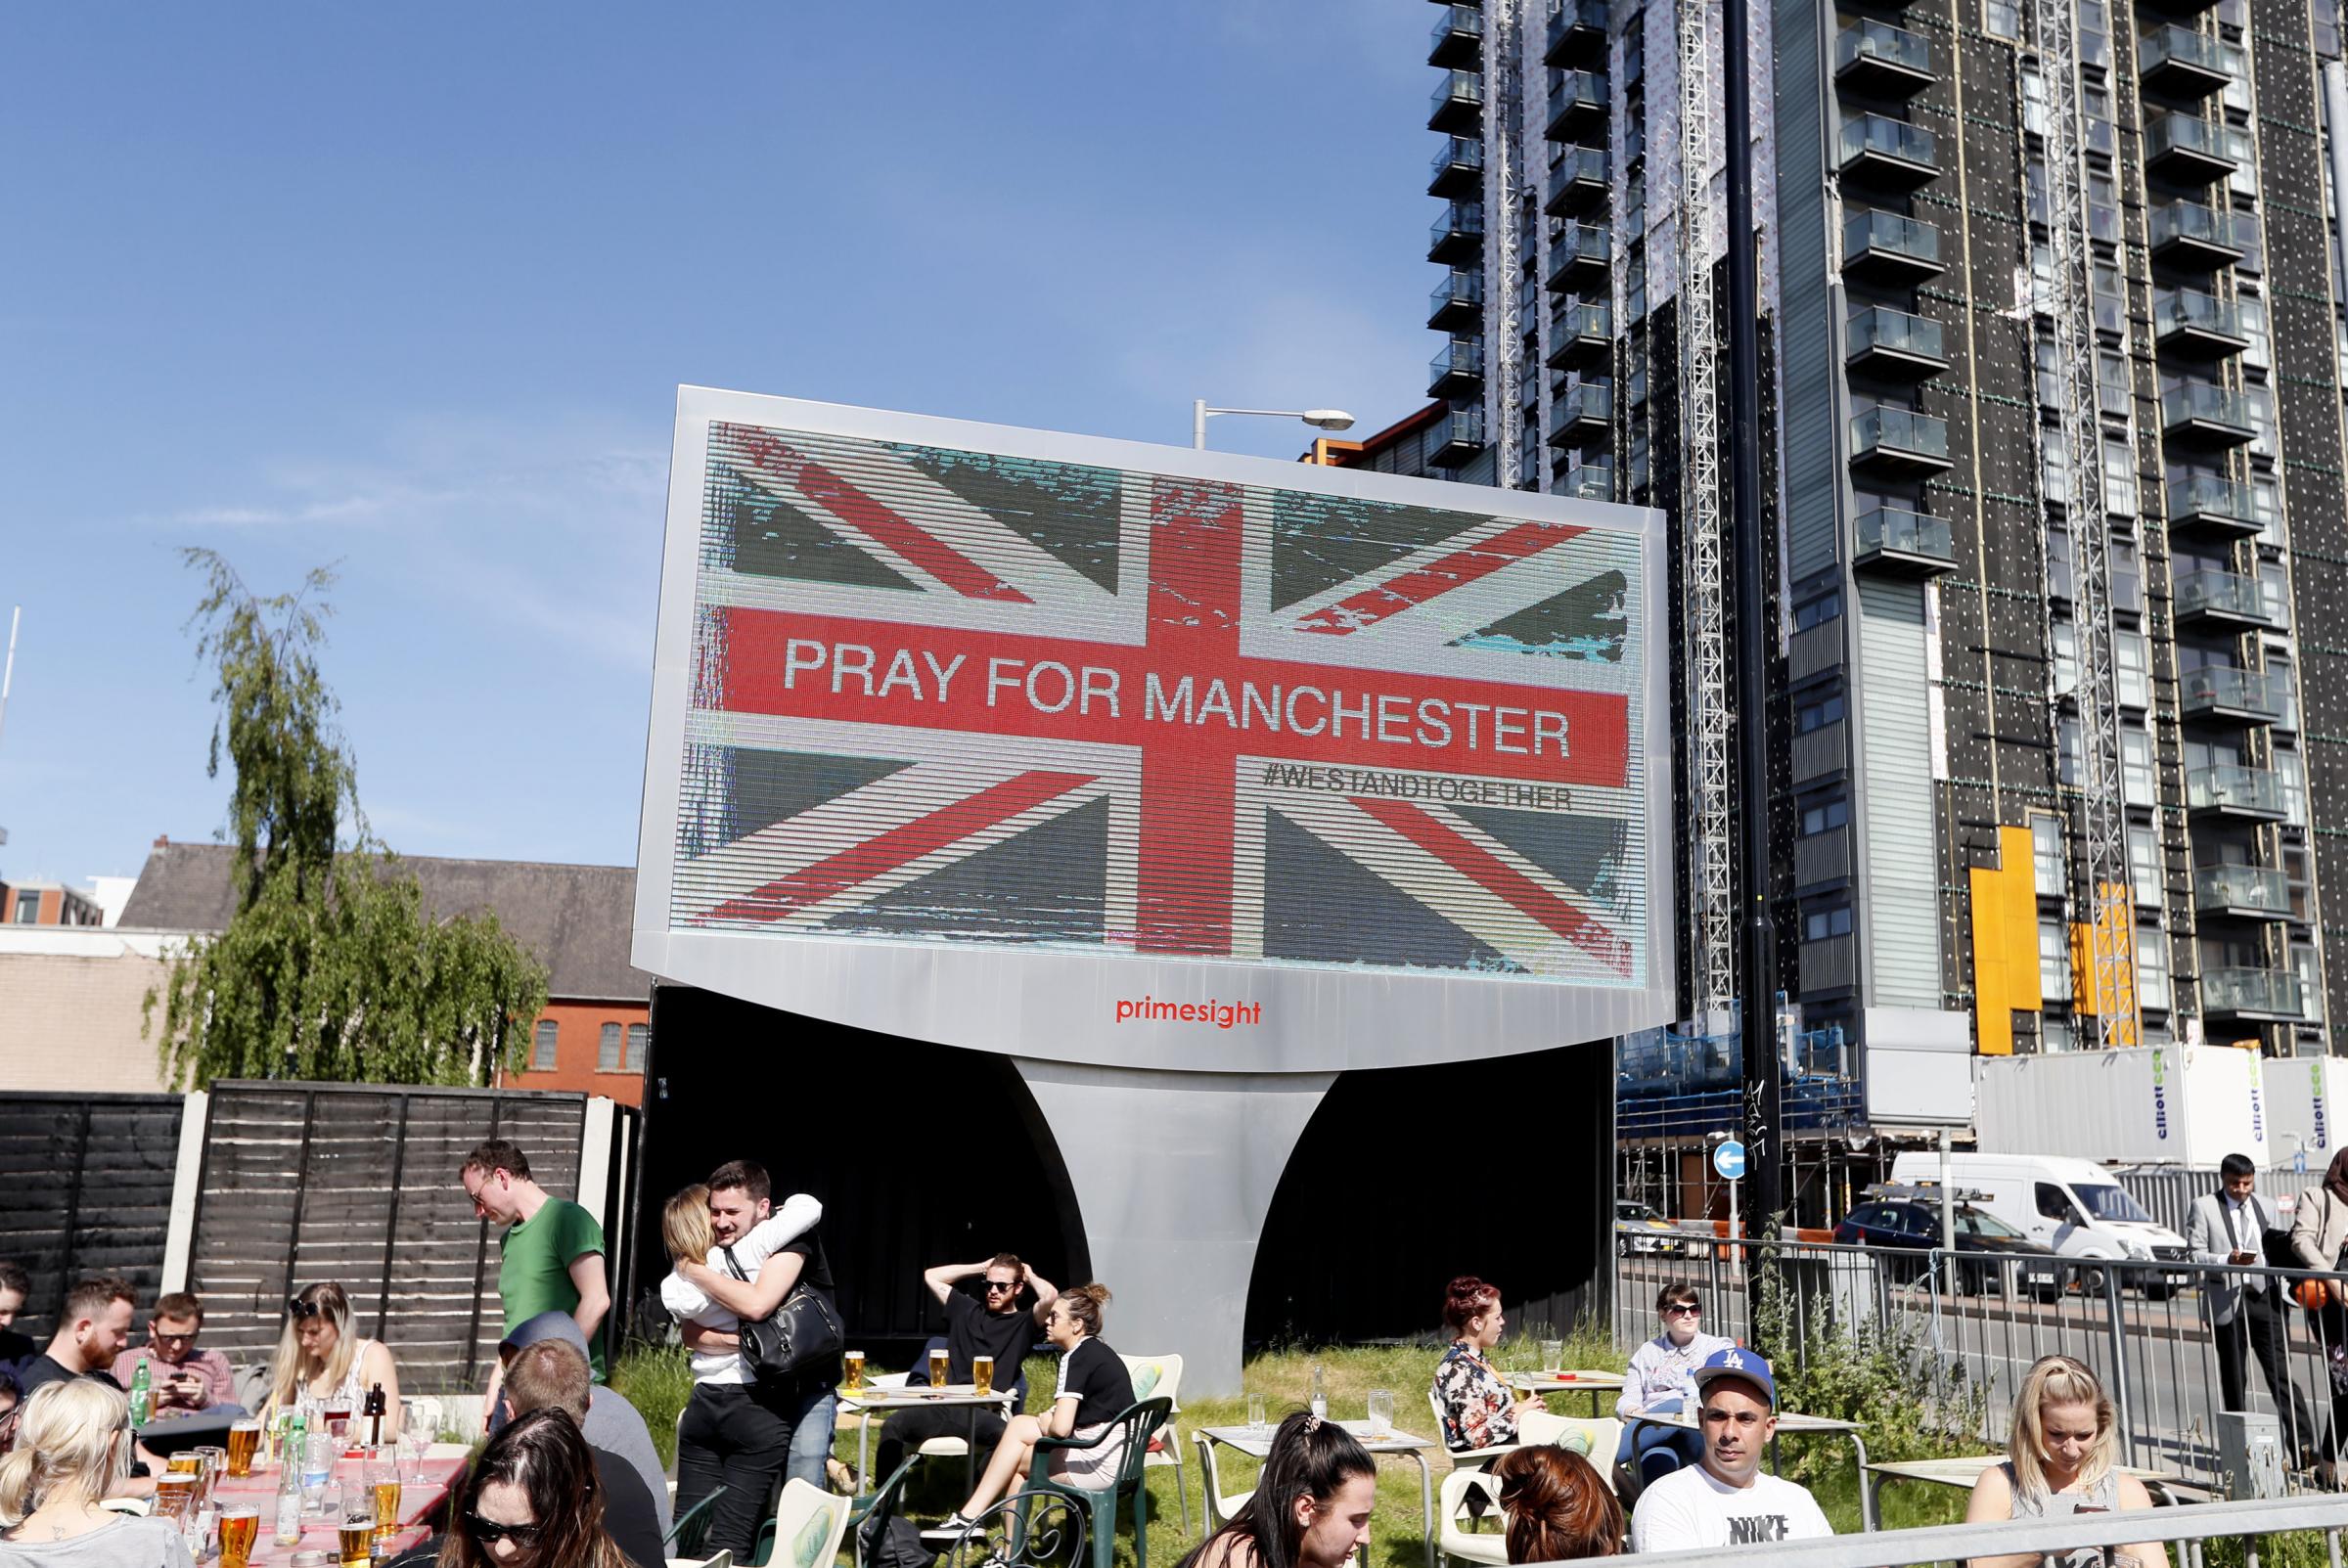 MANCHESTER ATTACK: York people on how we respond to such an atrocity